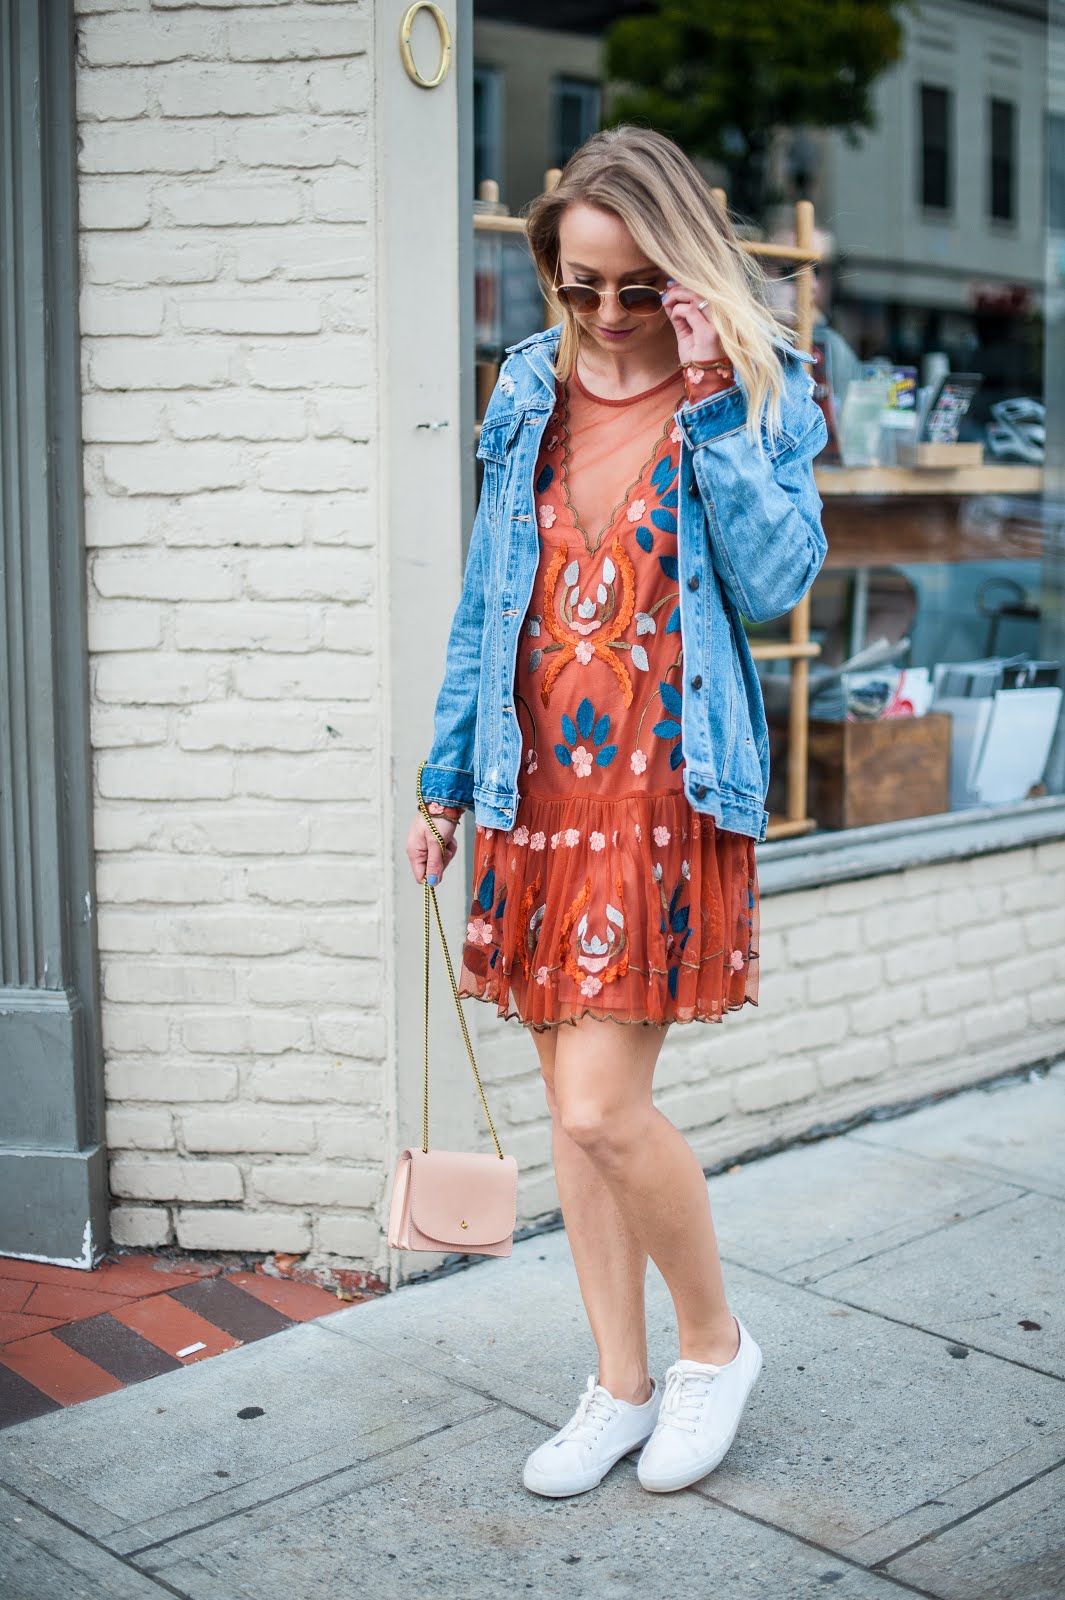 Her Name Is Sylvia: Free People Embroidered Dress